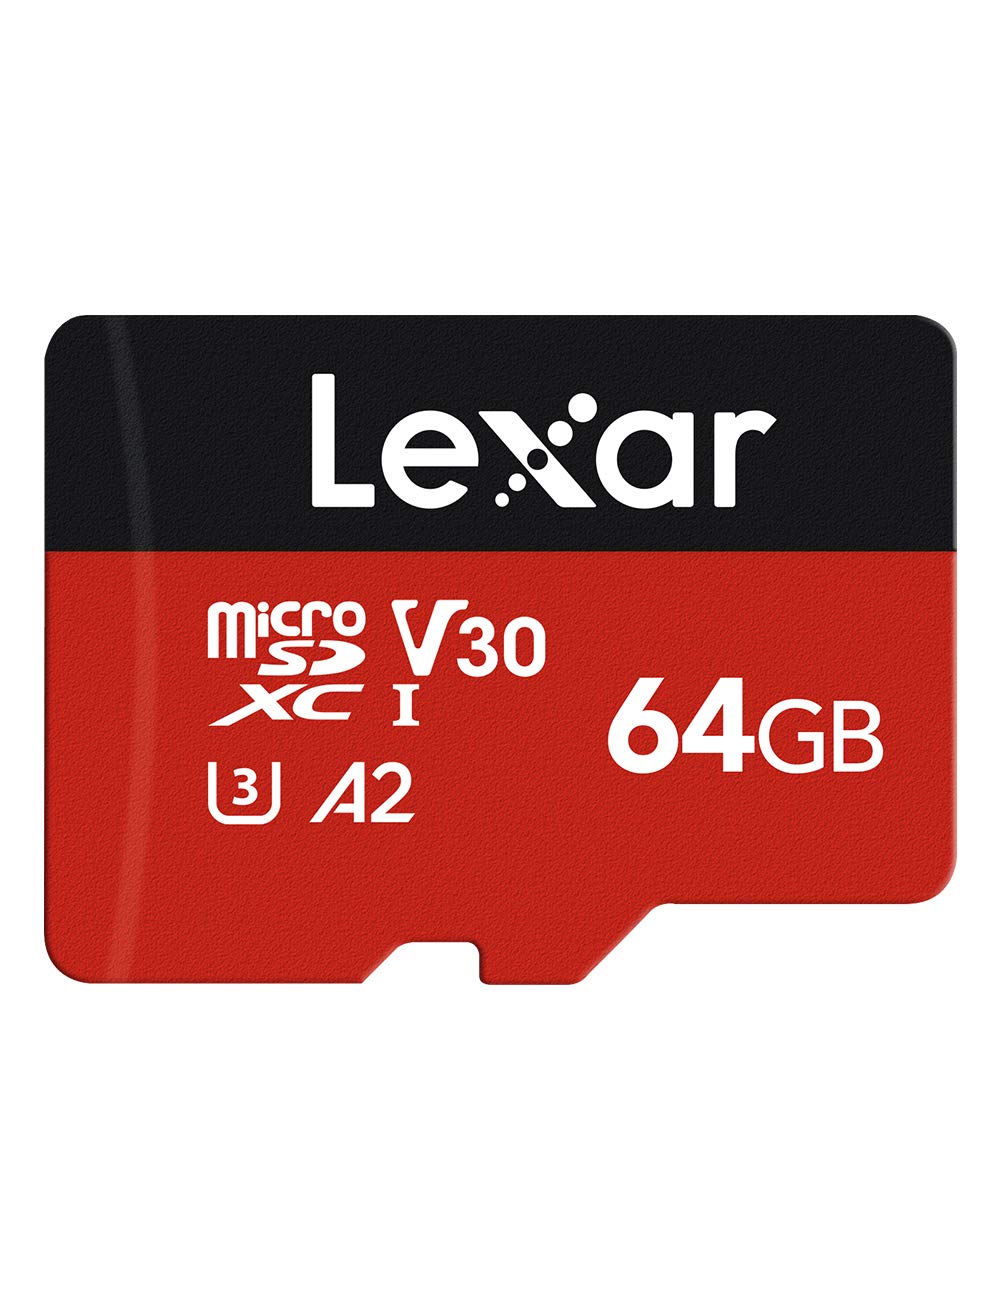 Lexar 64GB Micro SD Card, MicroSDXC Flash Memory Card with Adapter Up to 160MB/s, A2, U3, V30, C10, UHS-I, 4K UHD, Full HD, High Speed TF Card for Phones, Tablets, Drones, Dash Cam Security Camera